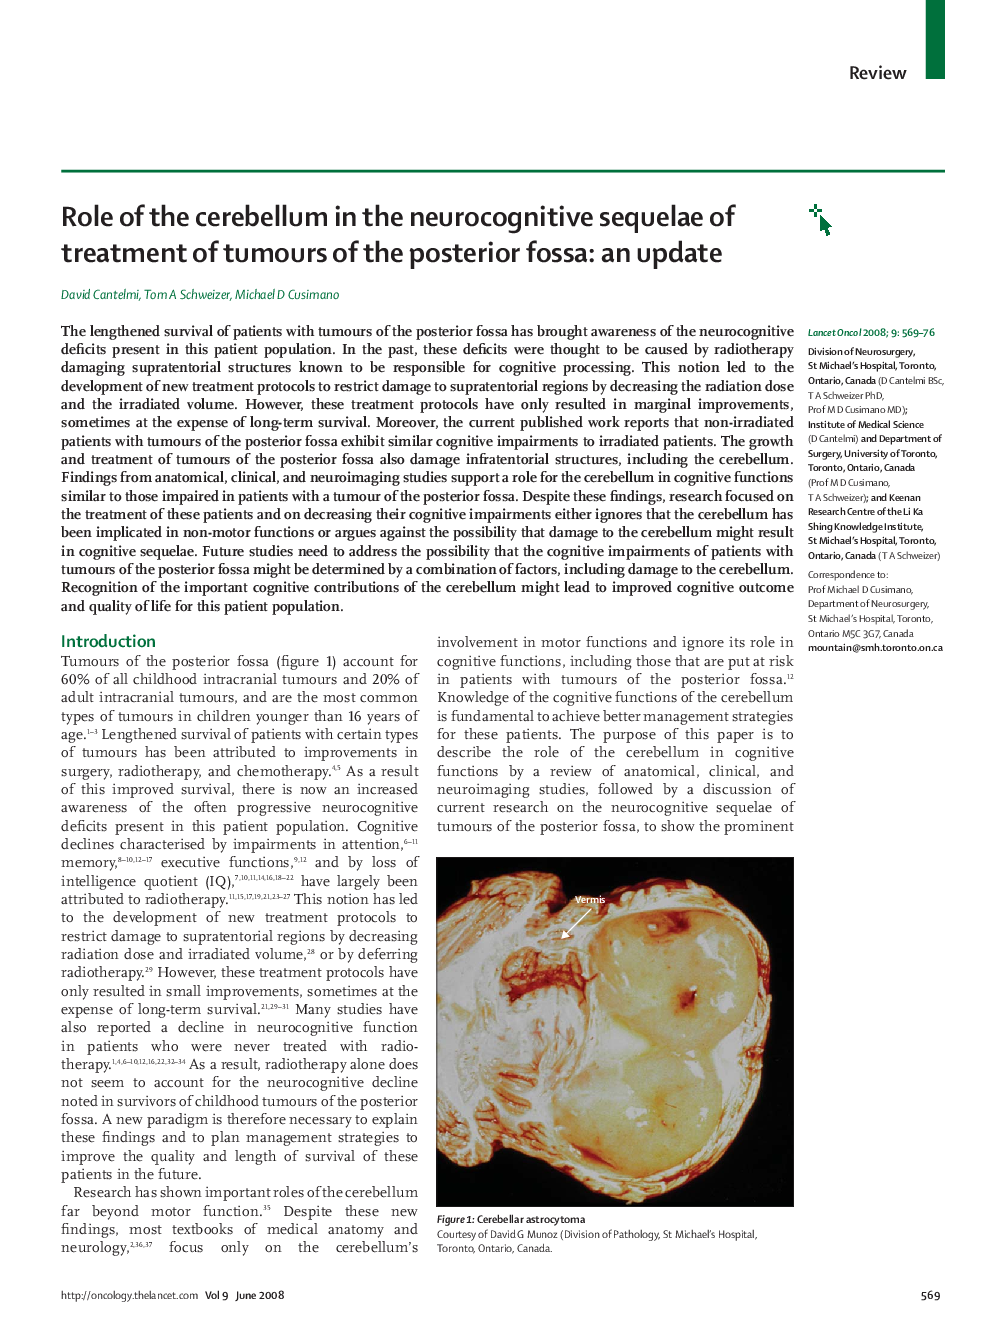 Role of the cerebellum in the neurocognitive sequelae of treatment of tumours of the posterior fossa: an update